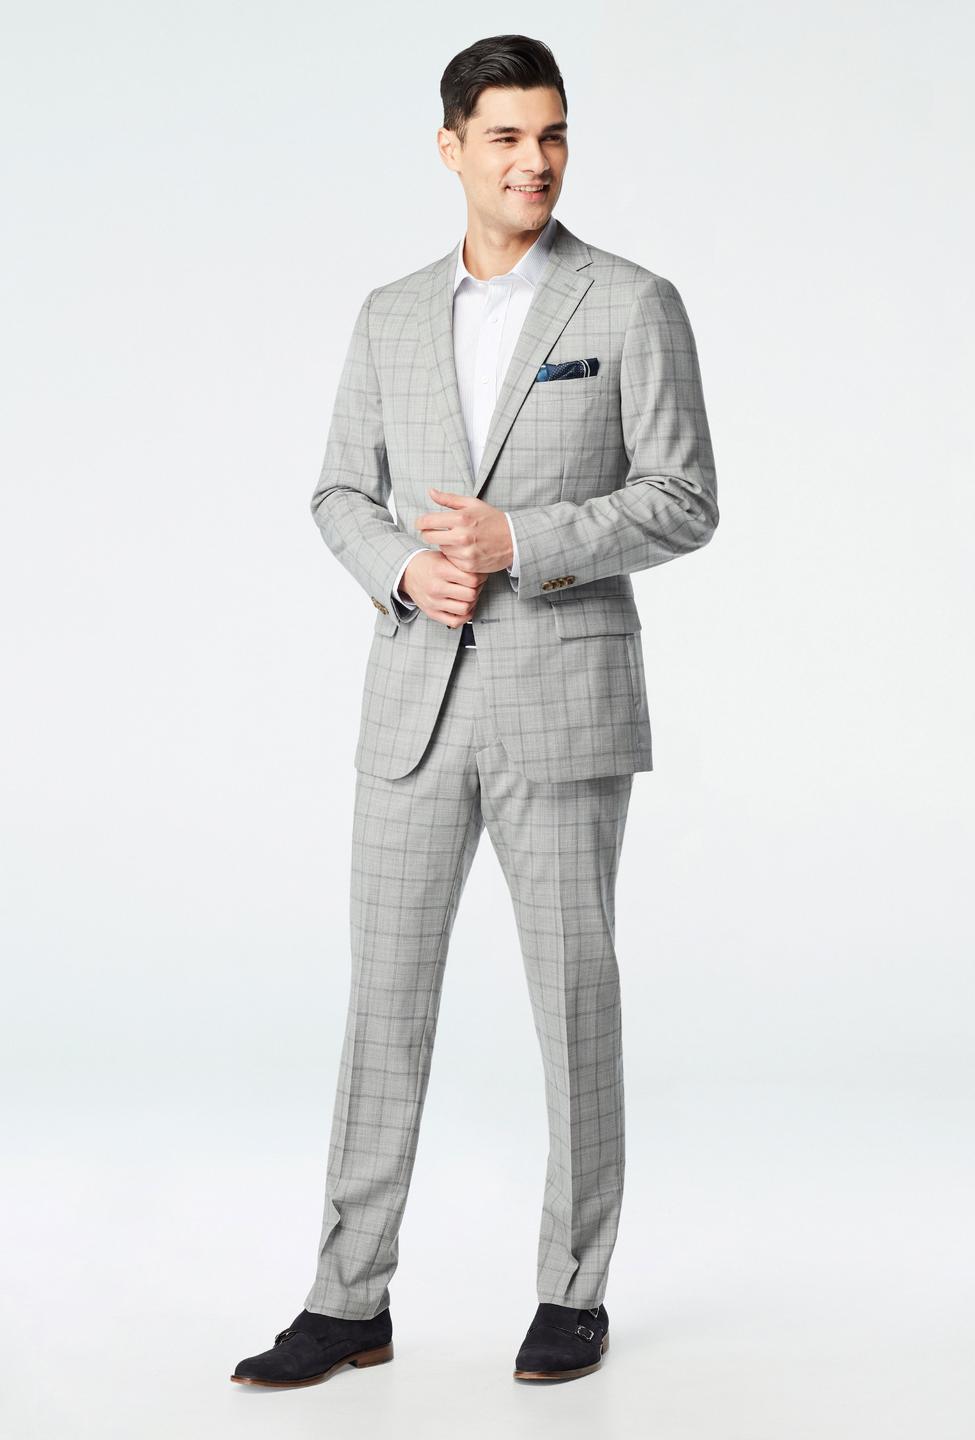 Gray suit - Camden Checked Design from Seasonal Indochino Collection